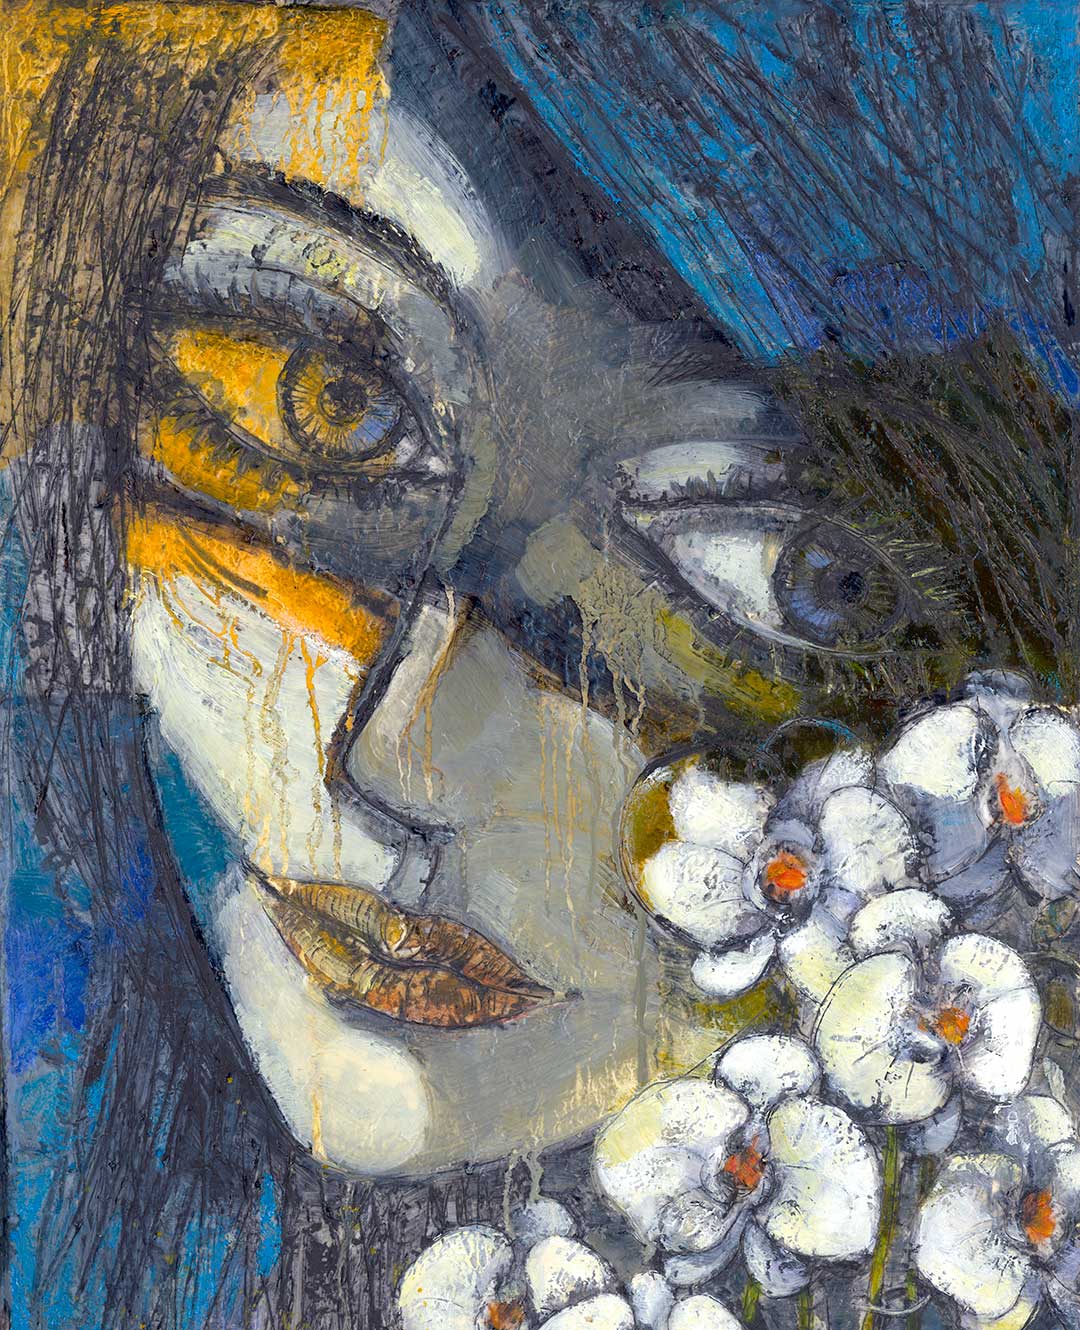 Girl bathed in blue and yellow with white orchids